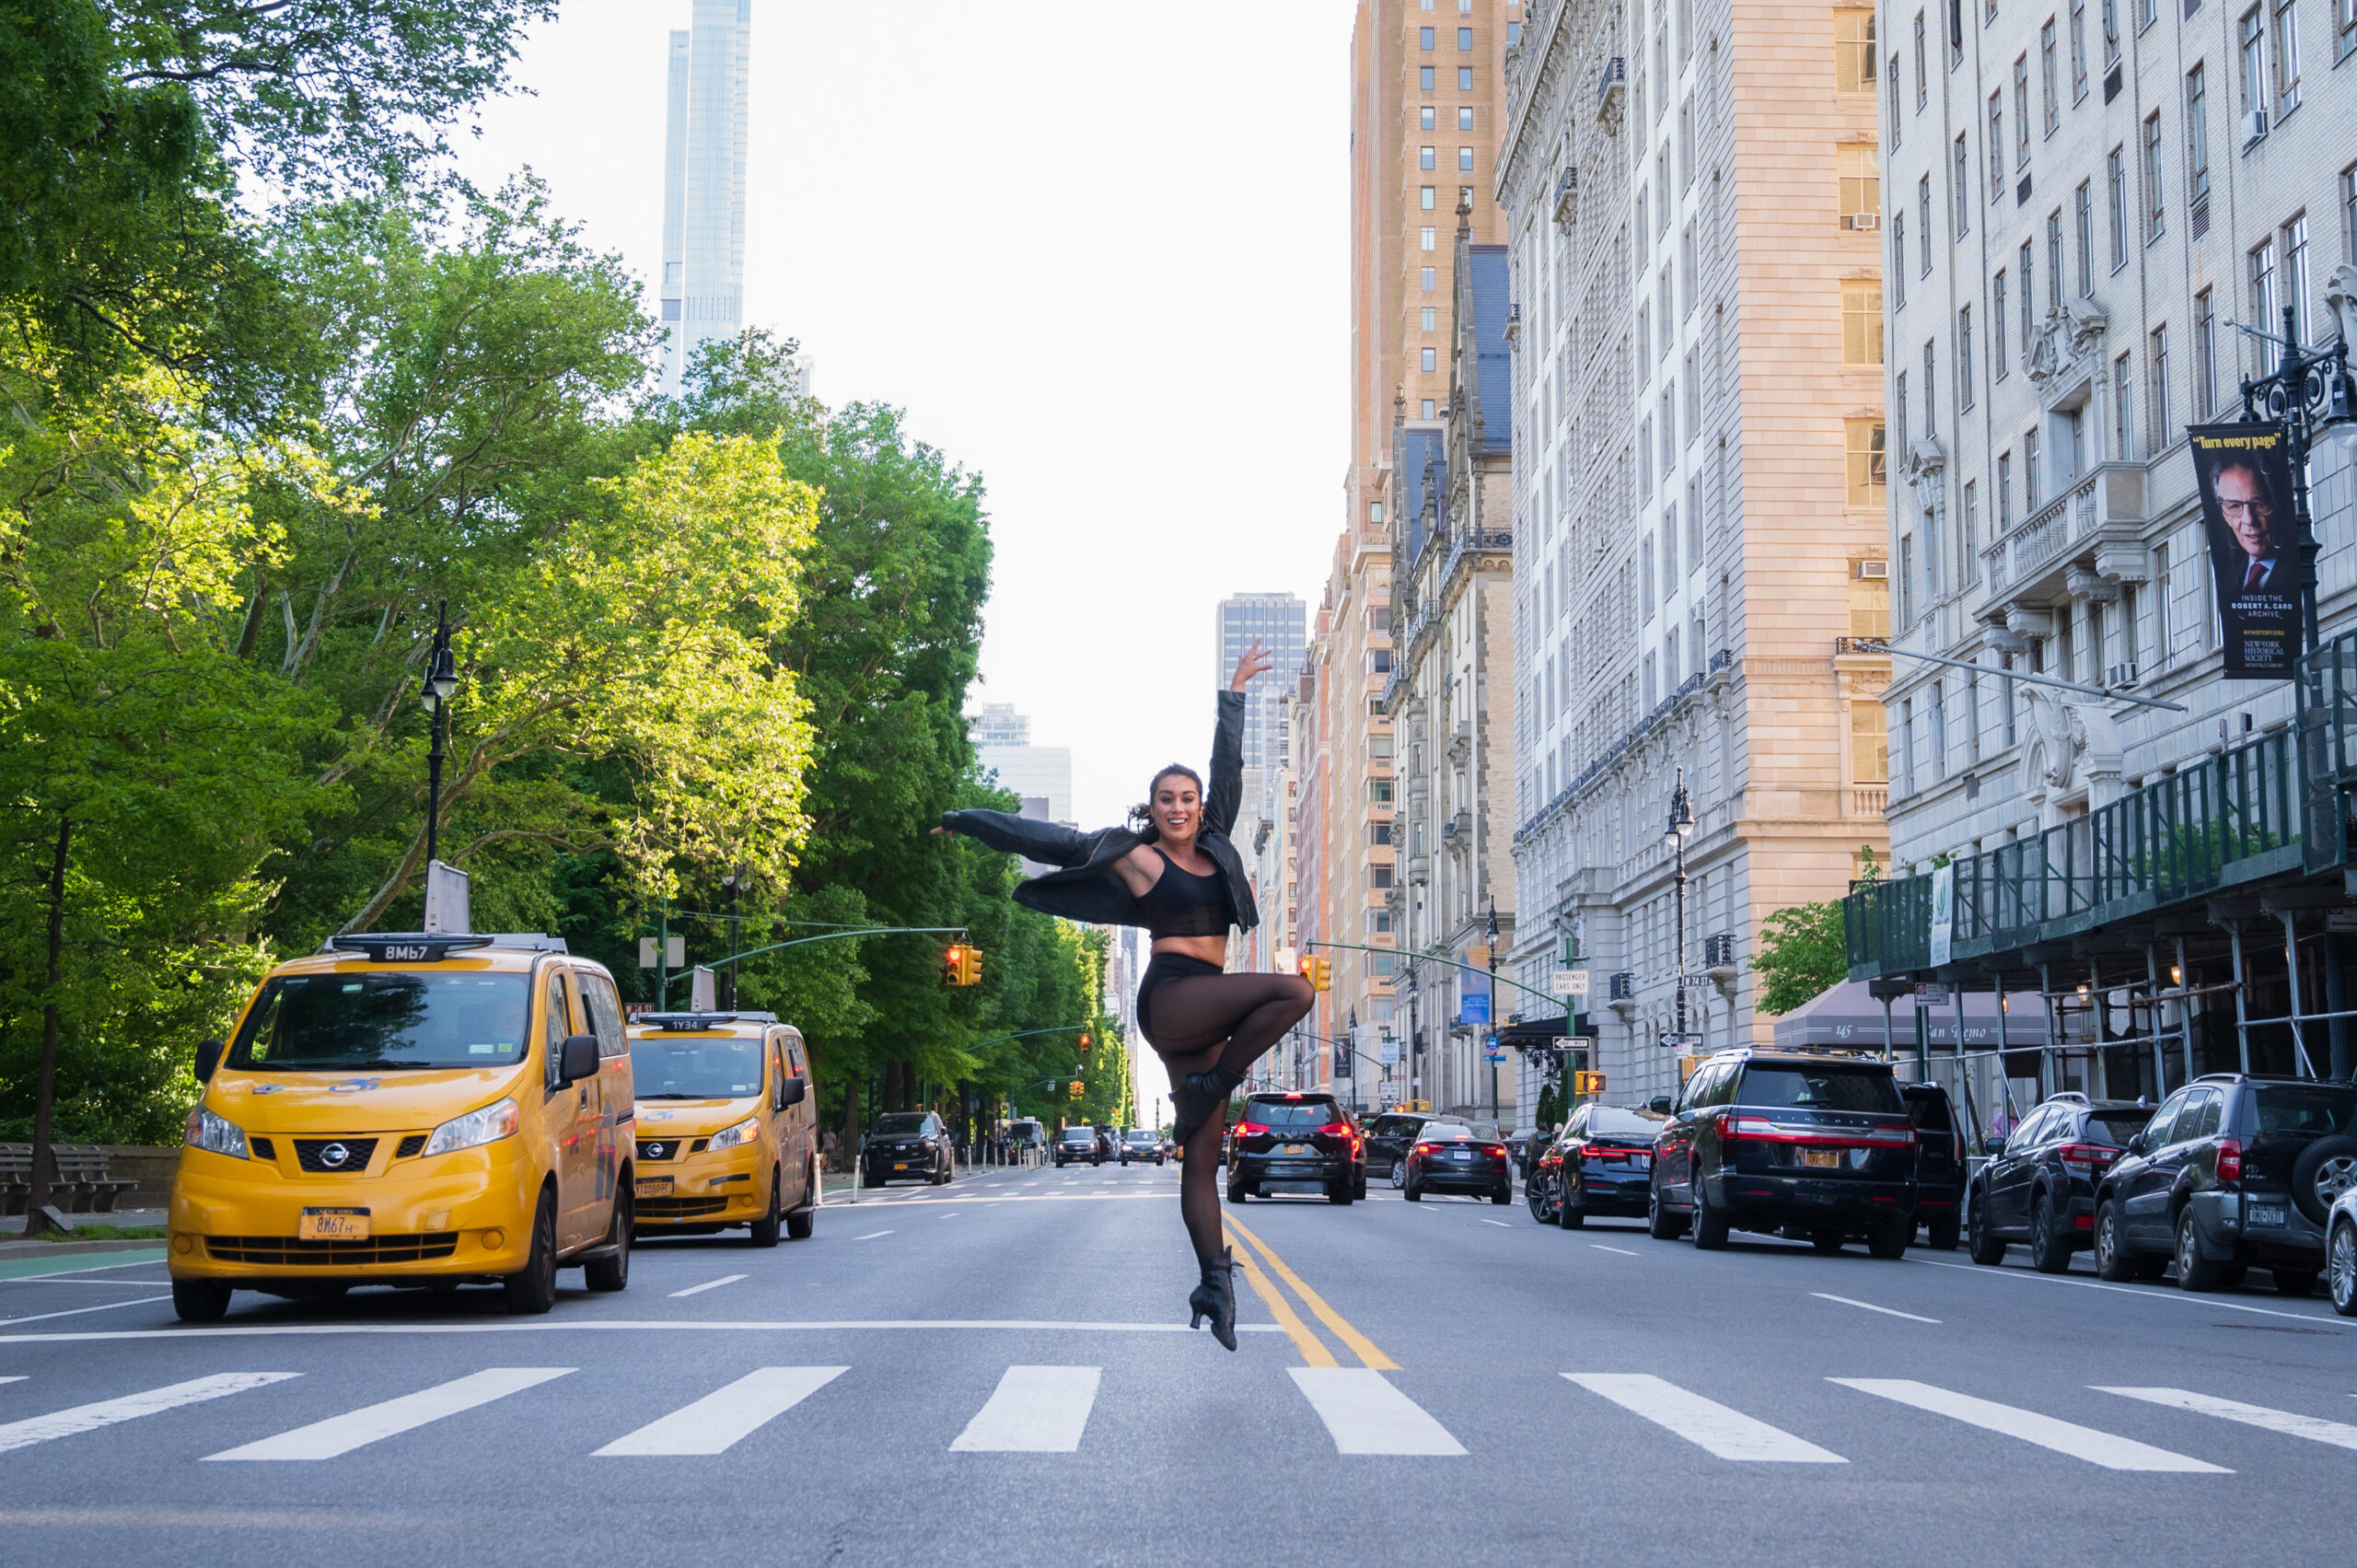 Dancer Maci Arms holding a dance pose in the middle of an NYC street.